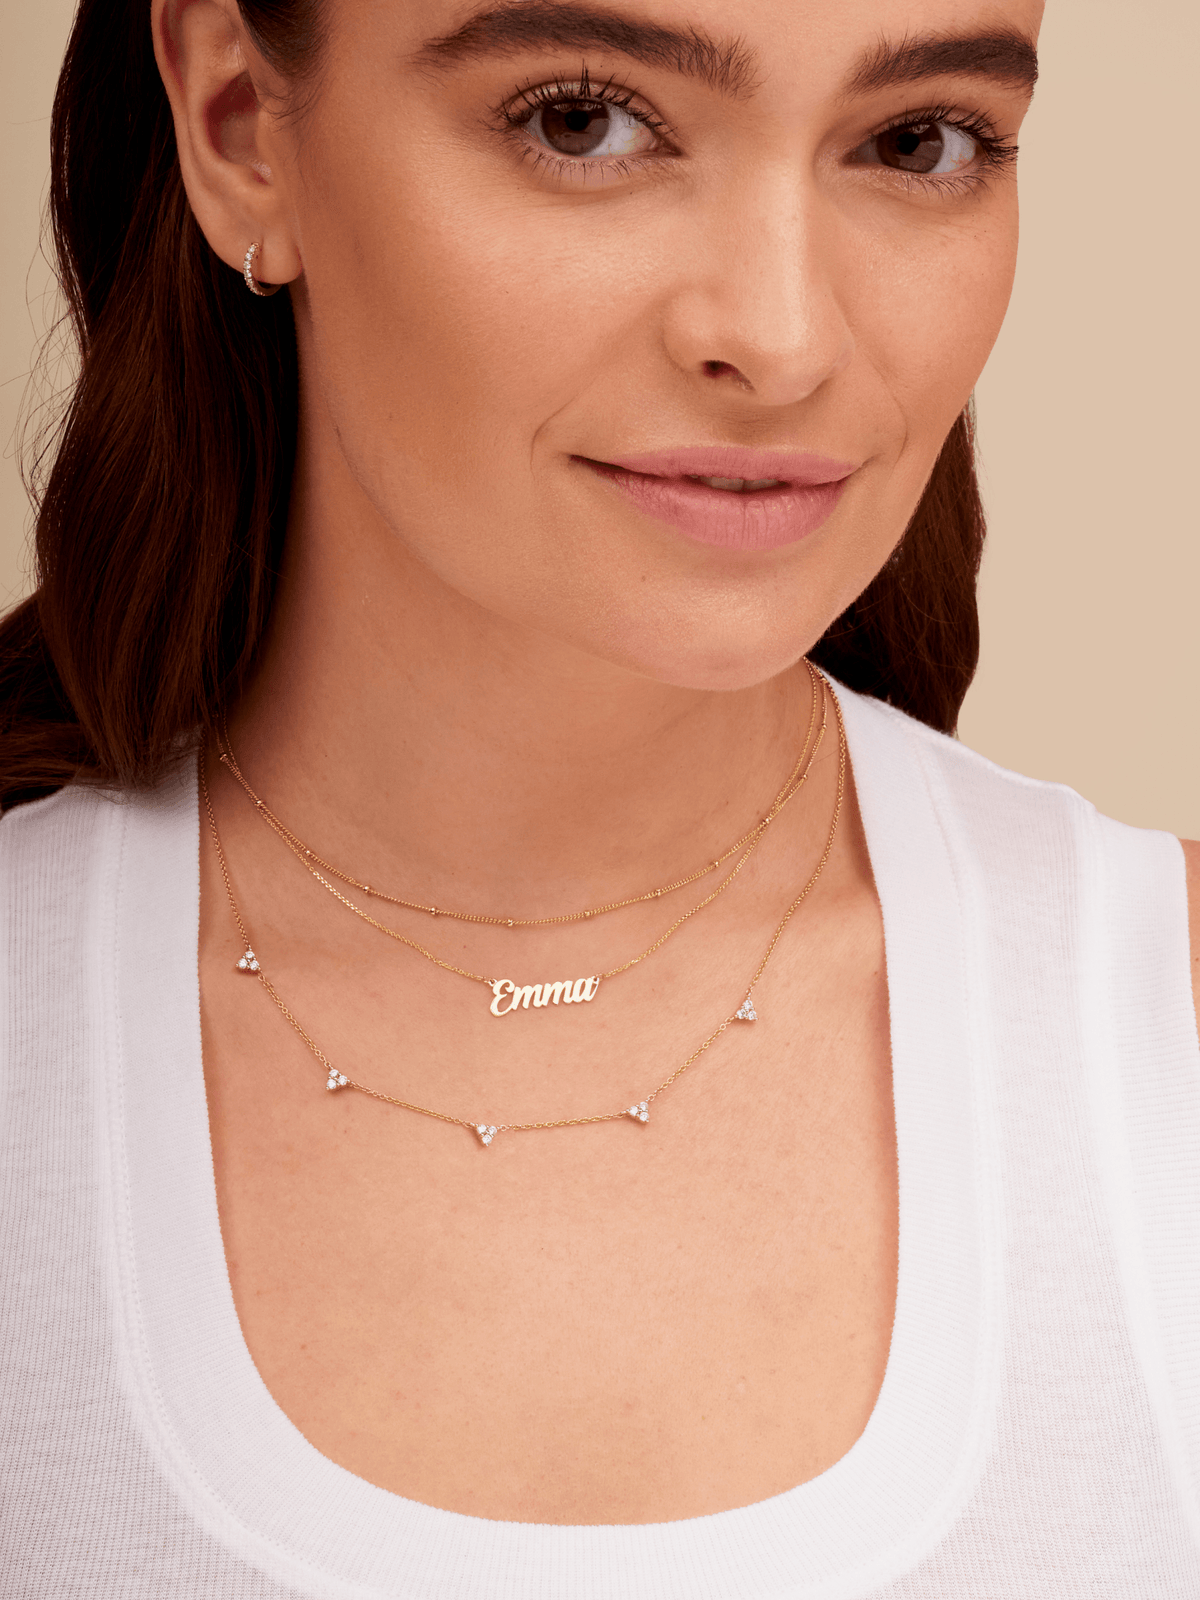 Gold script name necklace layered with trio triangle diamond necklace and satellite chain